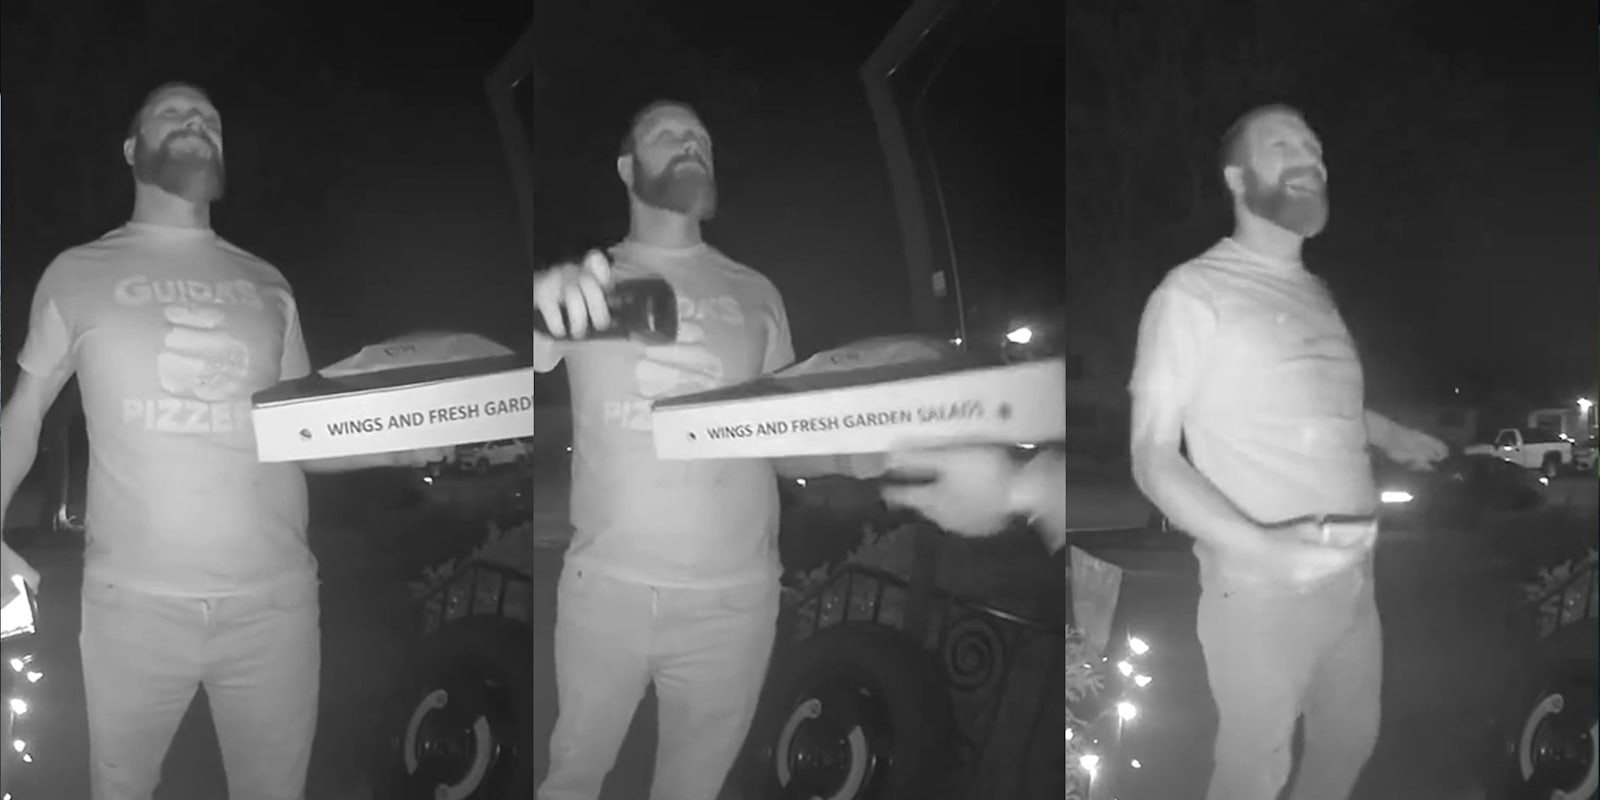 ring.com footage of pizza man speaking (l) ring.com footage of pizza man speaking and customer taking pizza (c) ring.com footage of pizza man speaking (r)